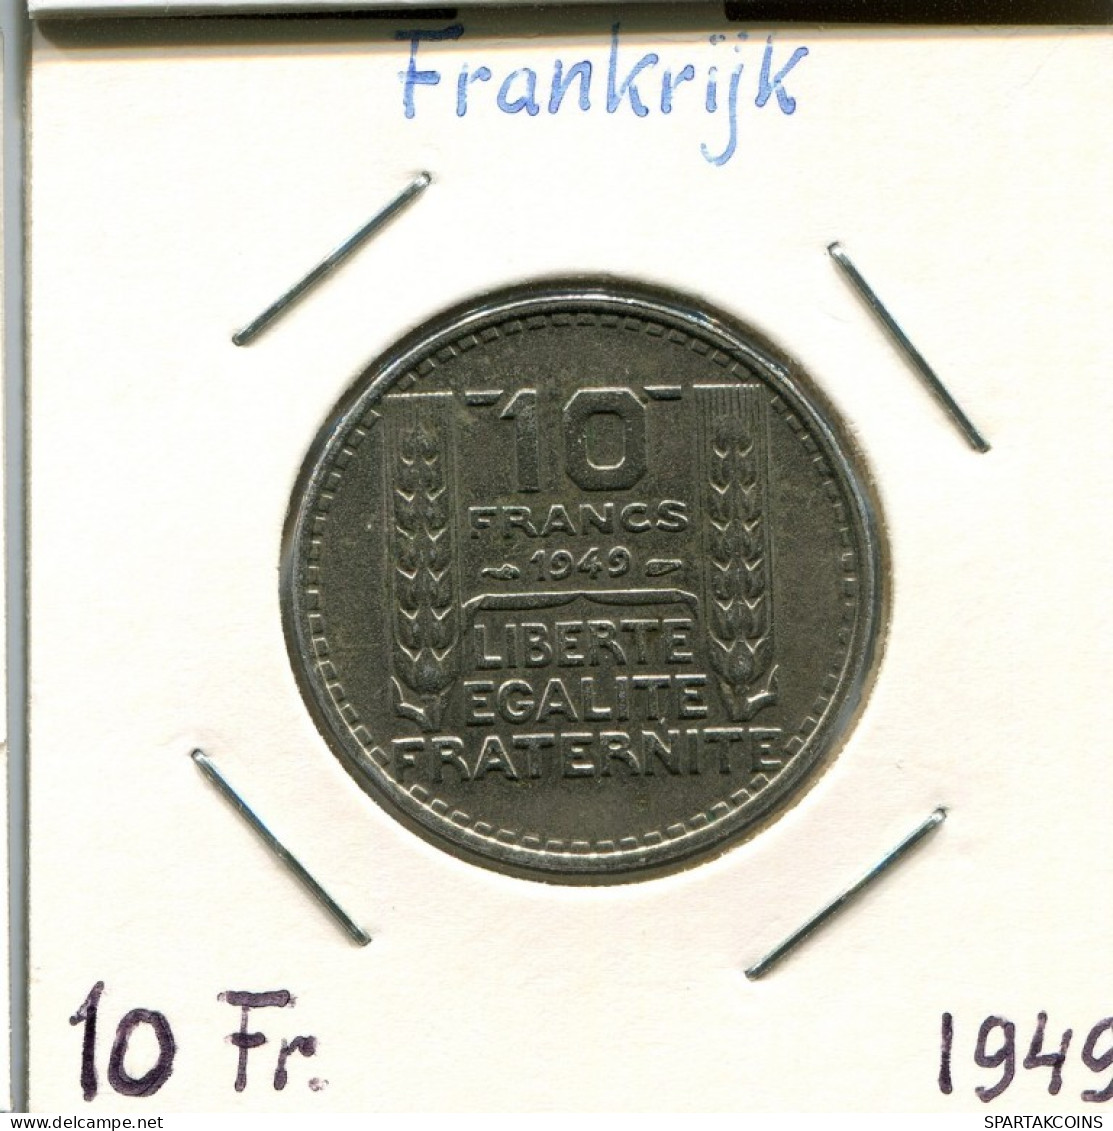 10 FRANCS 1949 FRANCE Coin French Coin #AM398.U.A - 10 Francs